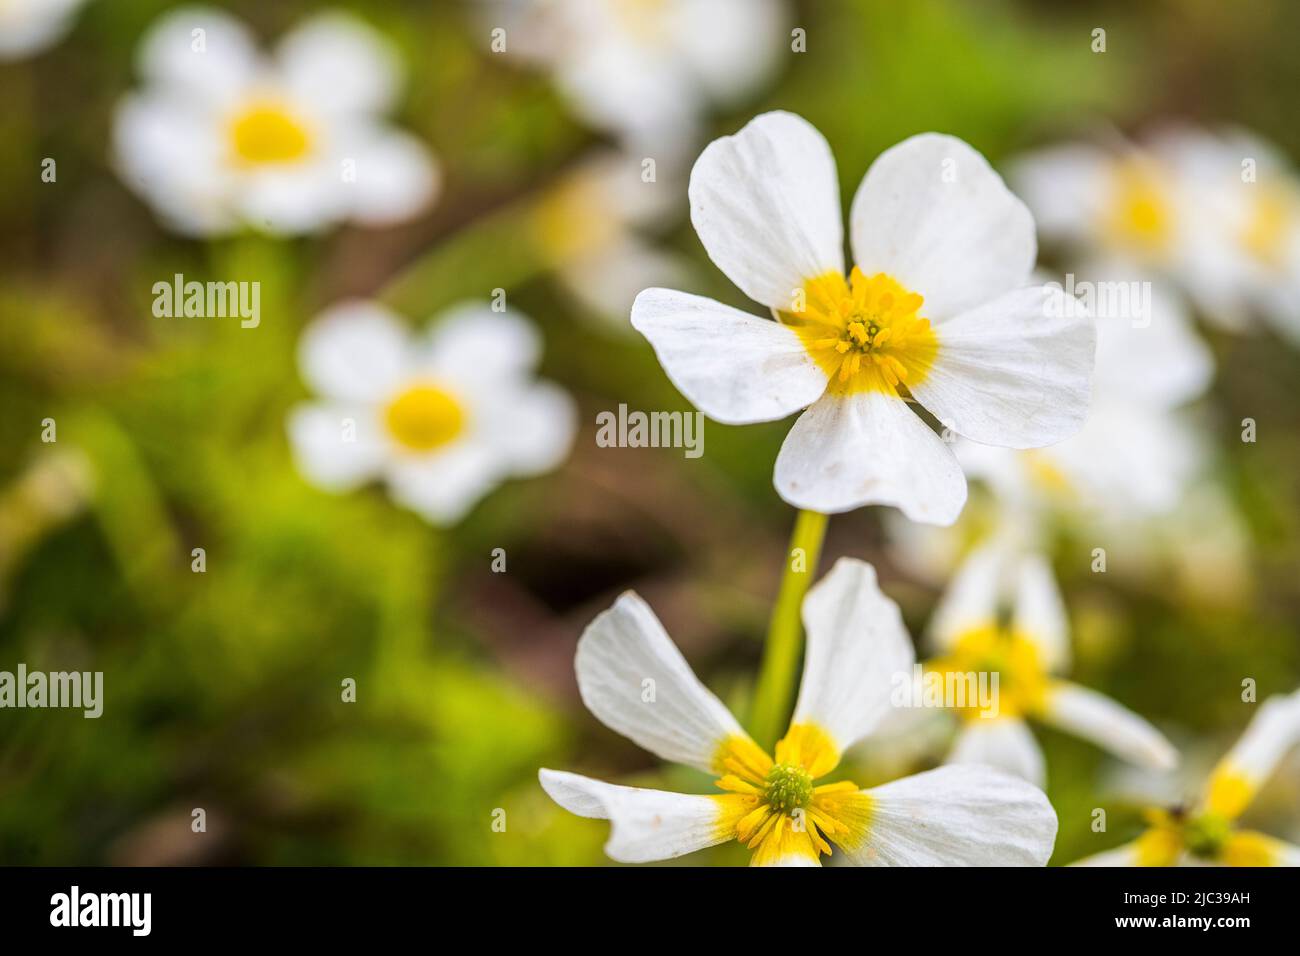 Ranunculus peltatus, the pond water-crowfoot is a plant species in the genus Ranunculus, native to Europe, southwestern Asia and northern Africa. Stock Photo